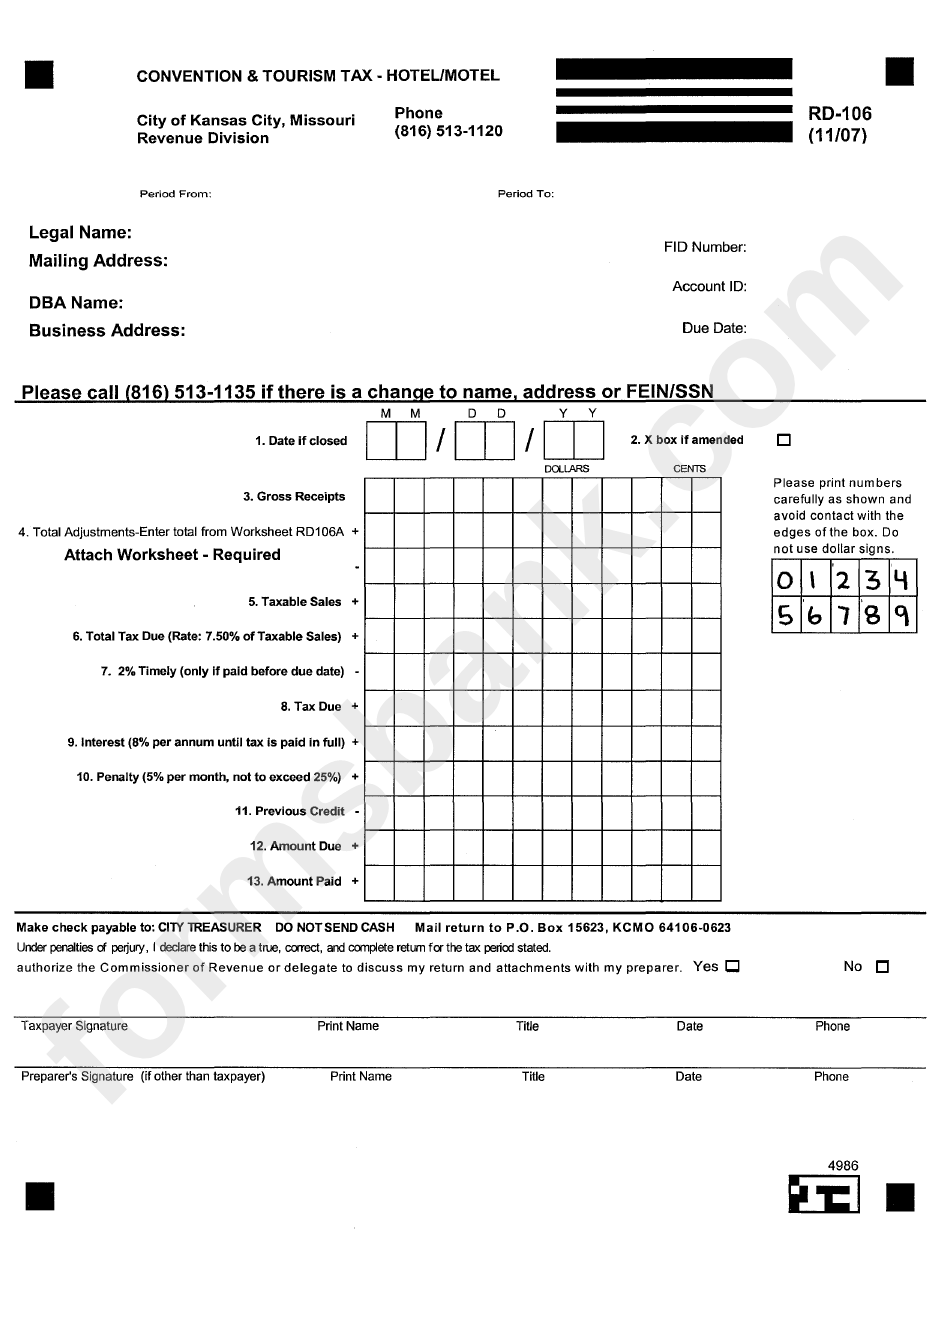 Form Rd-106 - Convention And Tourism Tax - Hotel/motel Form